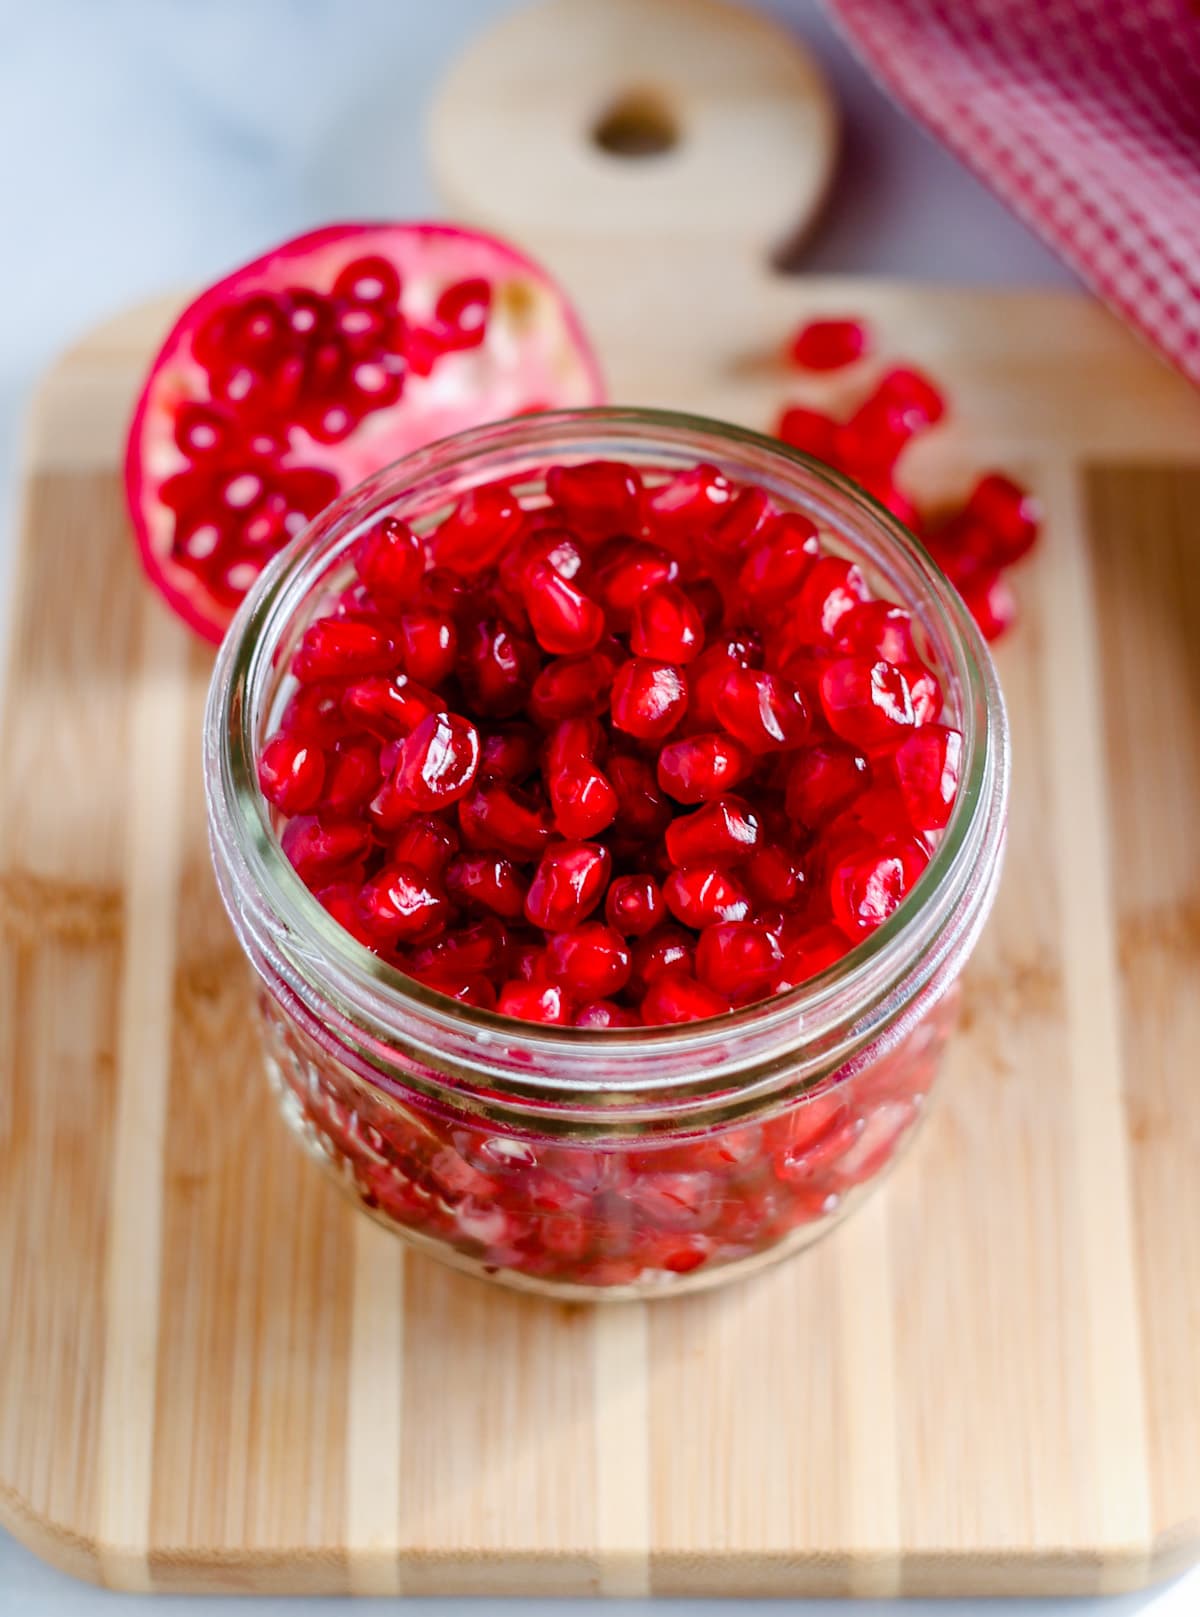 A jar of pomegranate seeds on a wooden board.